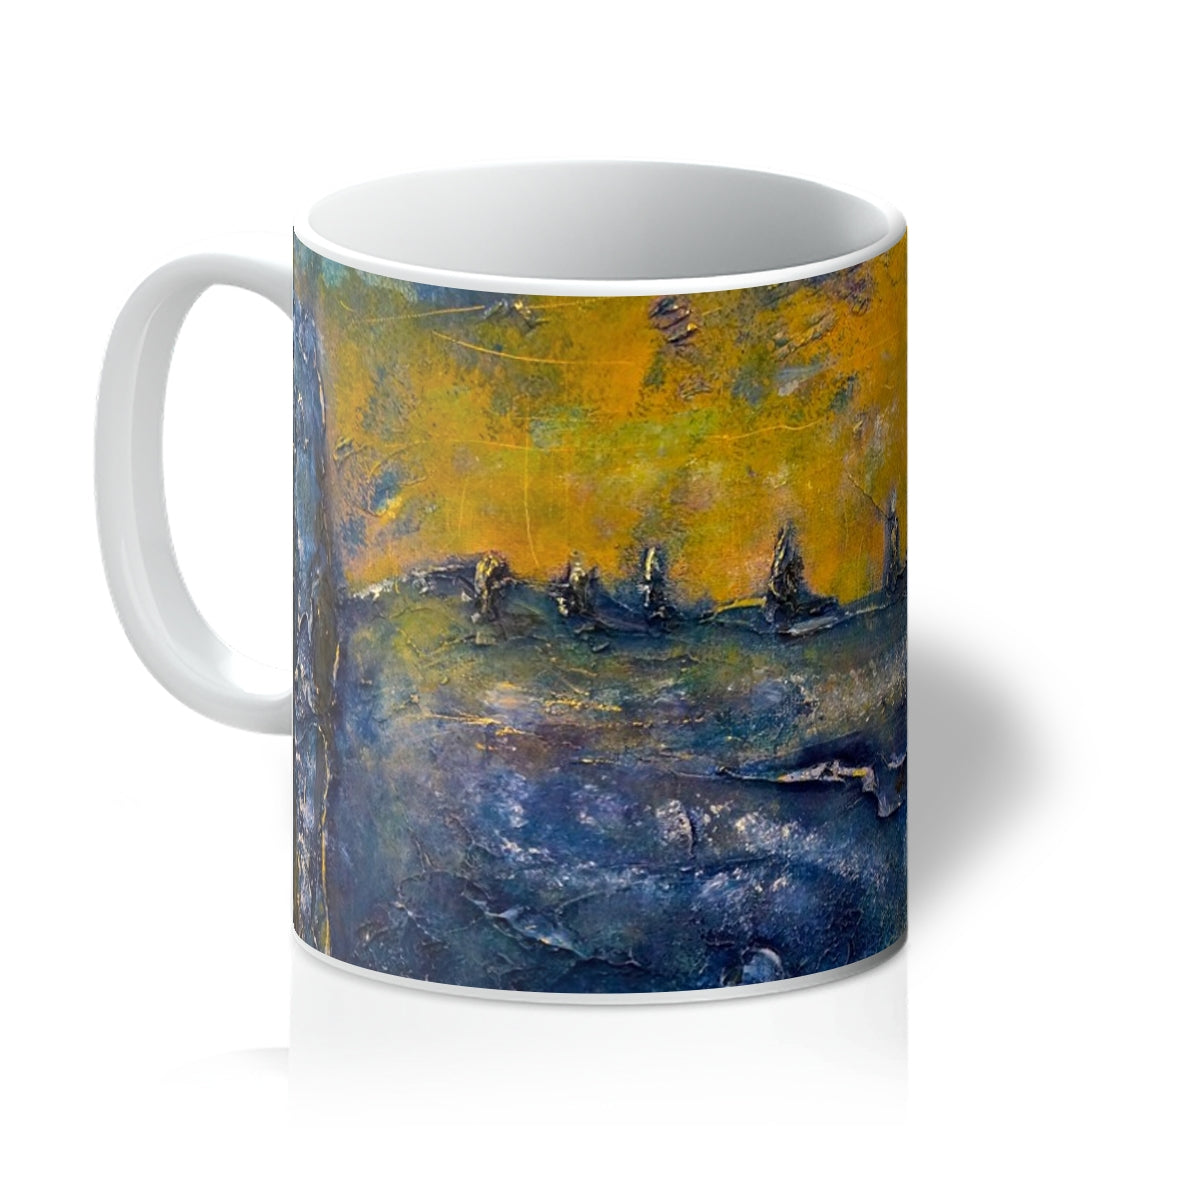 Brodgar Moonlight Orkney Art Gifts Mug-Mugs-Orkney Art Gallery-11oz-White-Paintings, Prints, Homeware, Art Gifts From Scotland By Scottish Artist Kevin Hunter